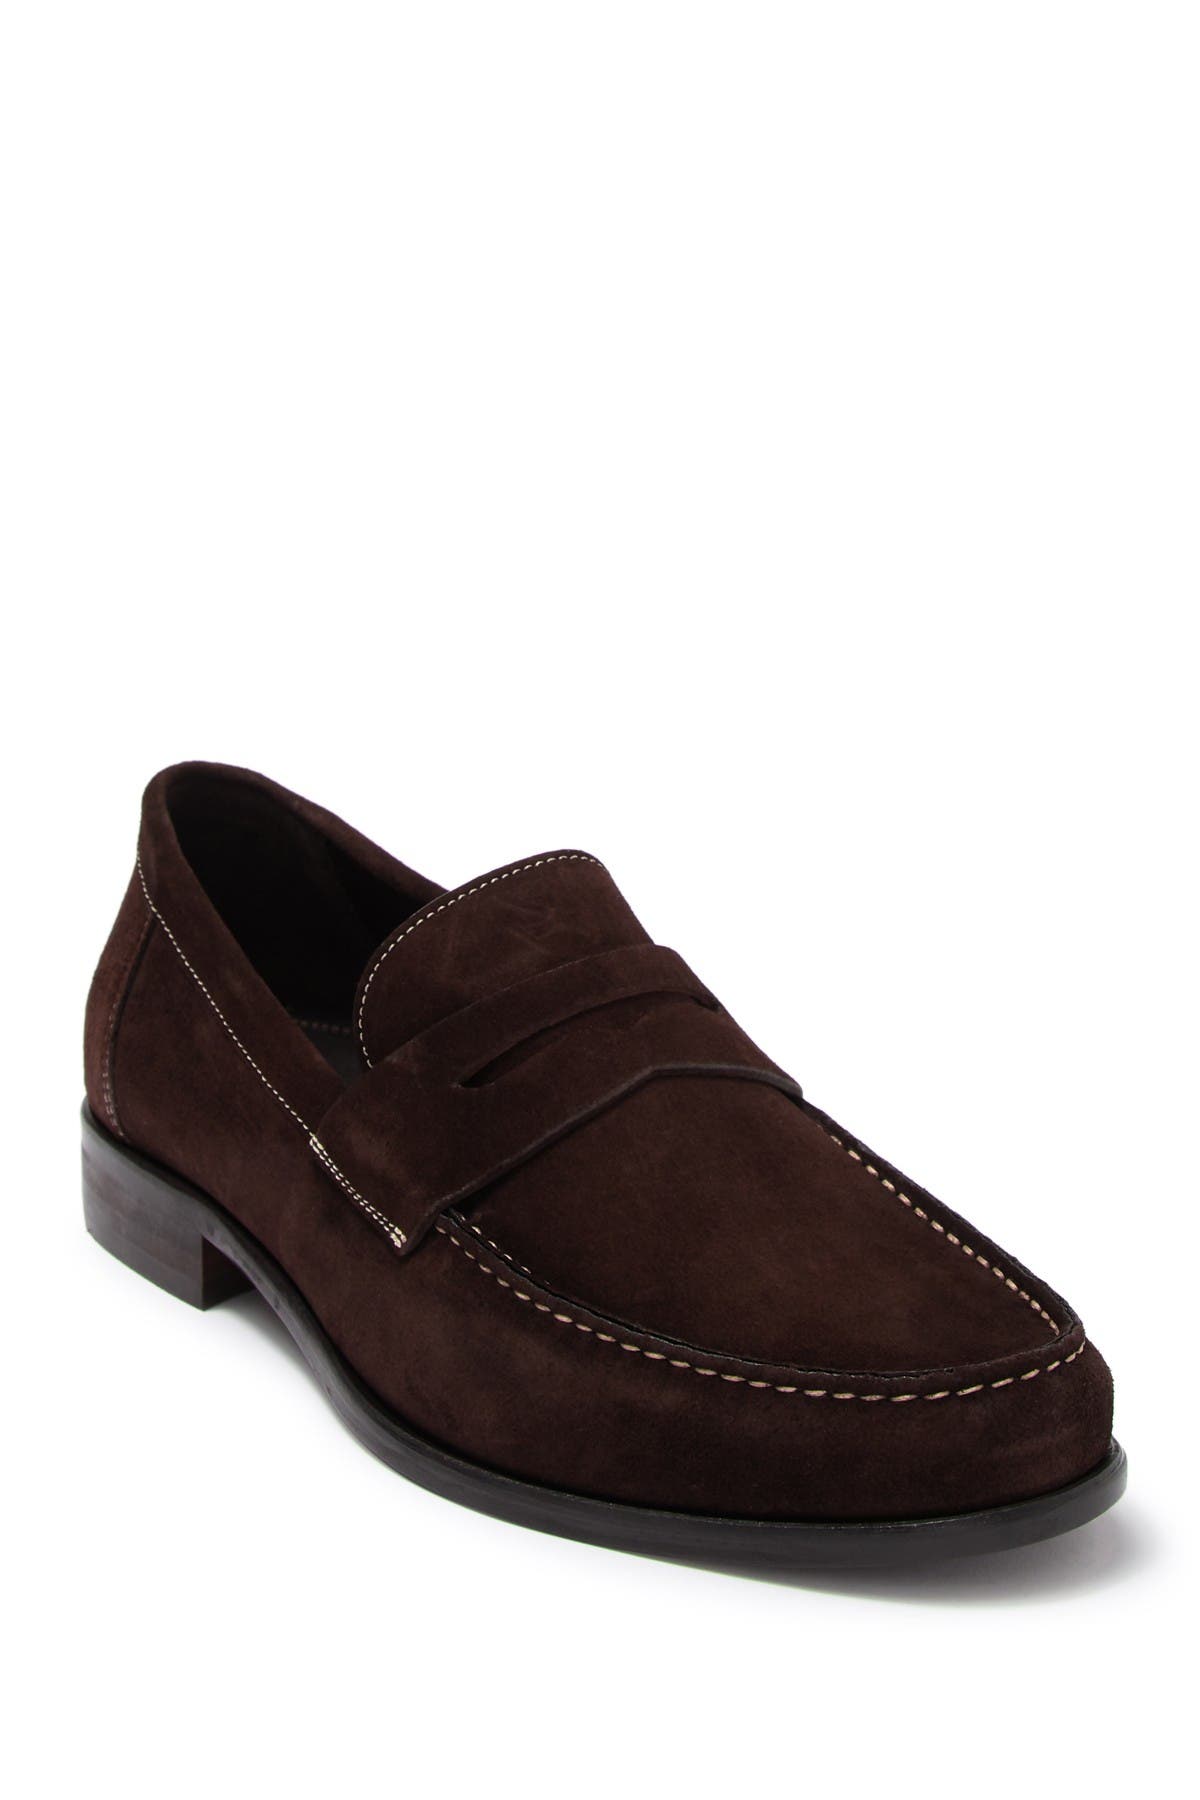 M by Bruno Magli | Pecan Suede Penny 